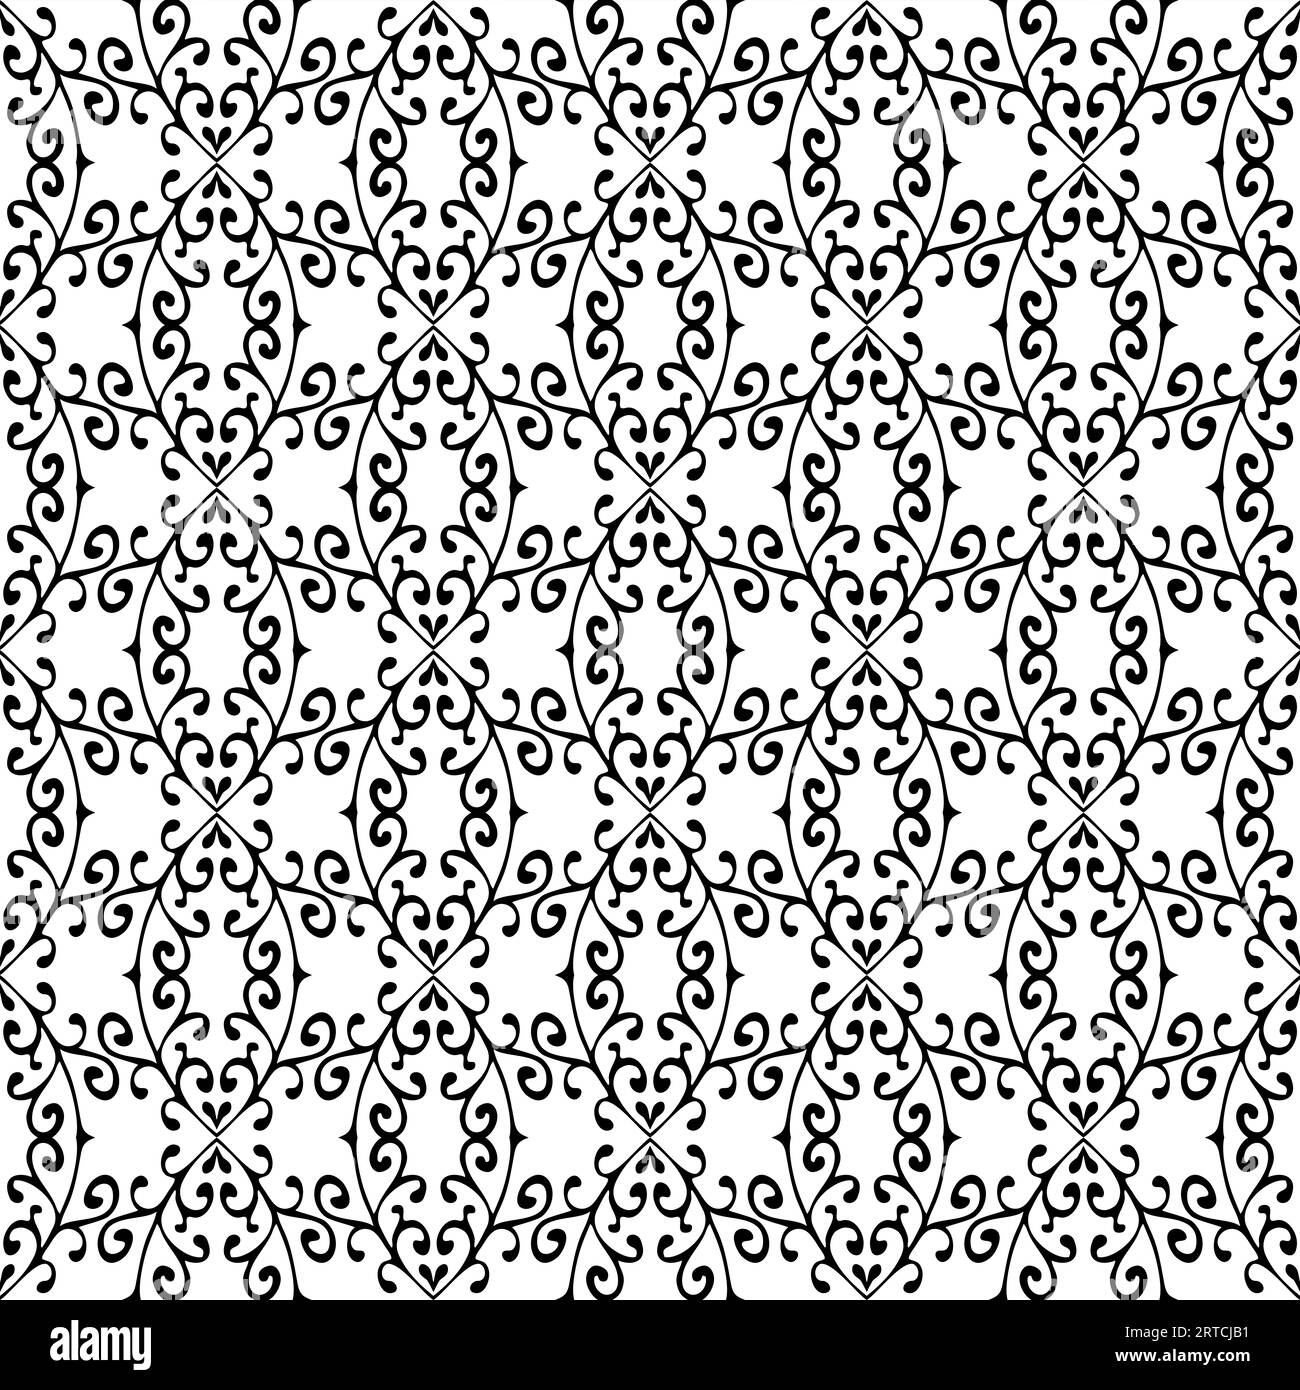 Seamless pattern with retro folk motifs in black and white Stock Photo